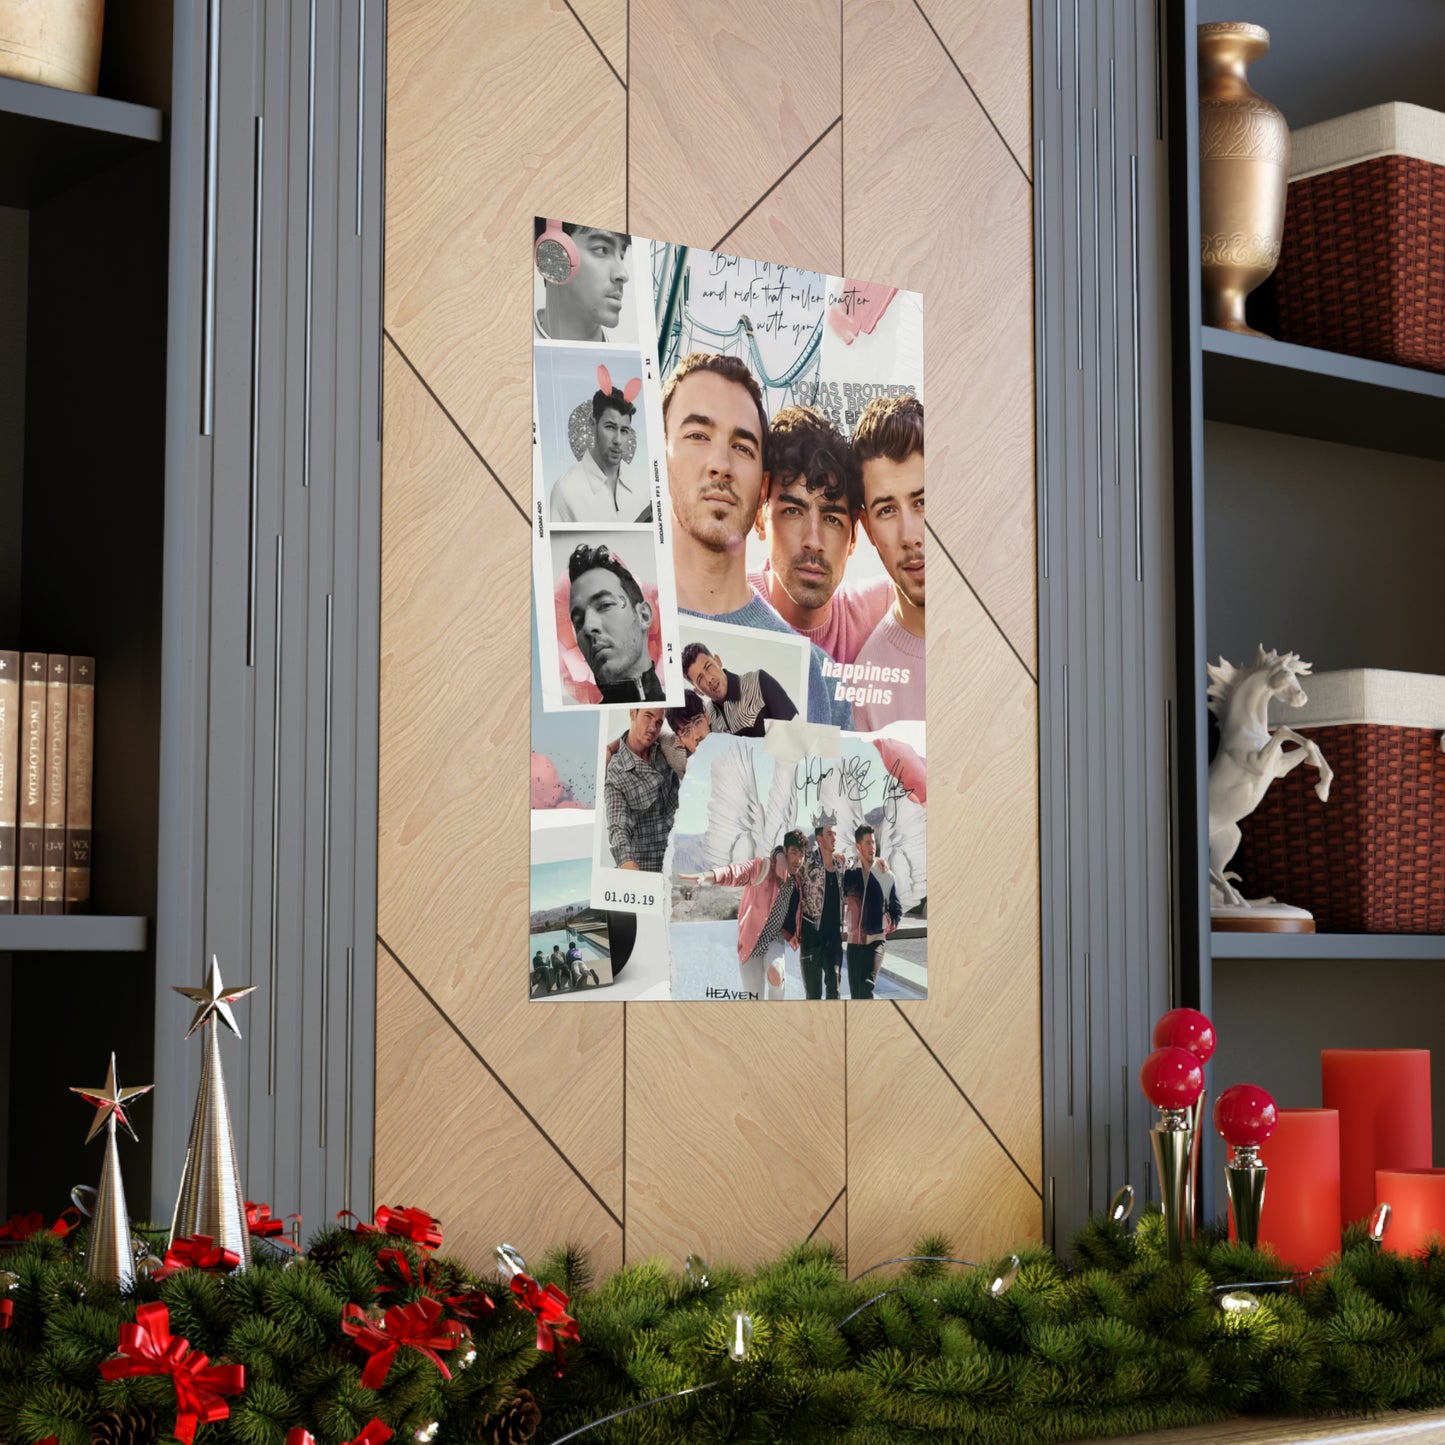 Jonas Brothers Happiness Begins Collage Matte Poster